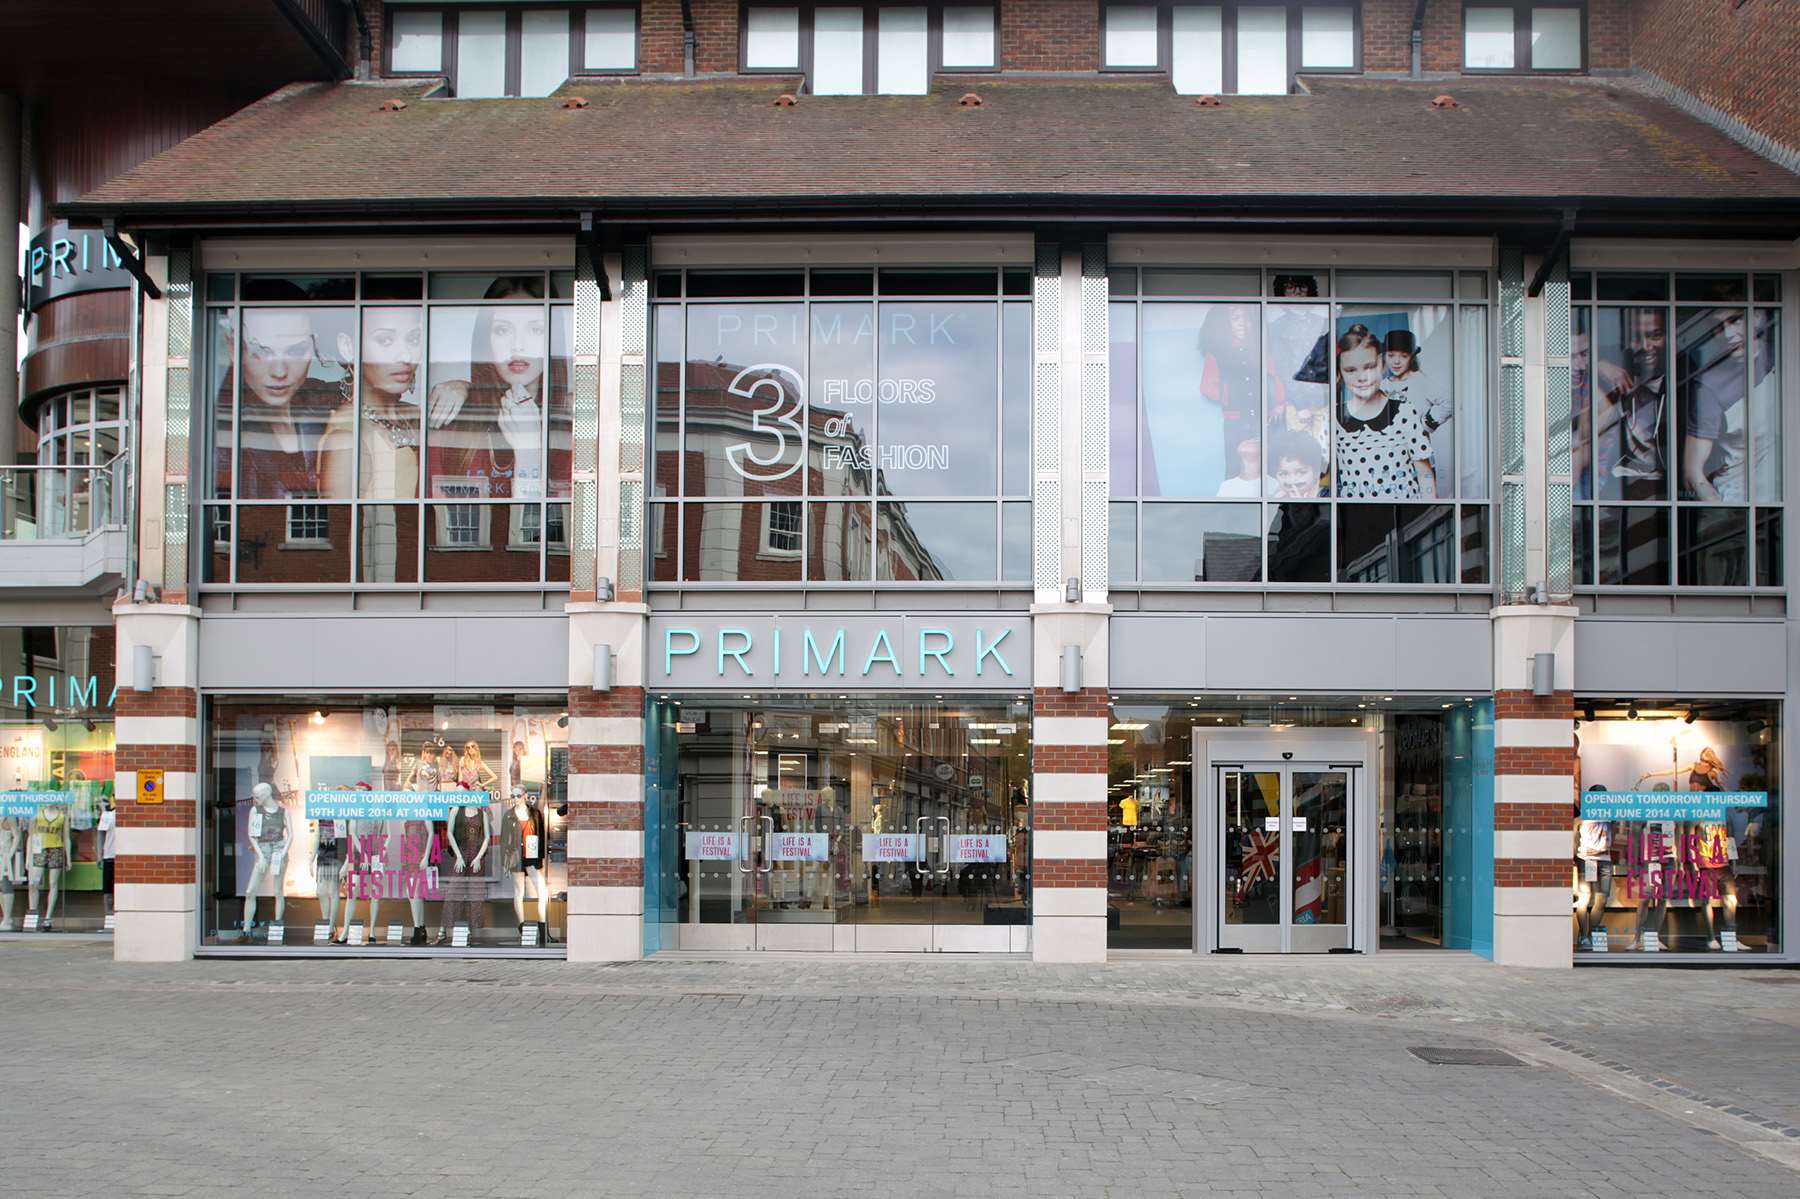 A new Primark store has opened in Canterbury